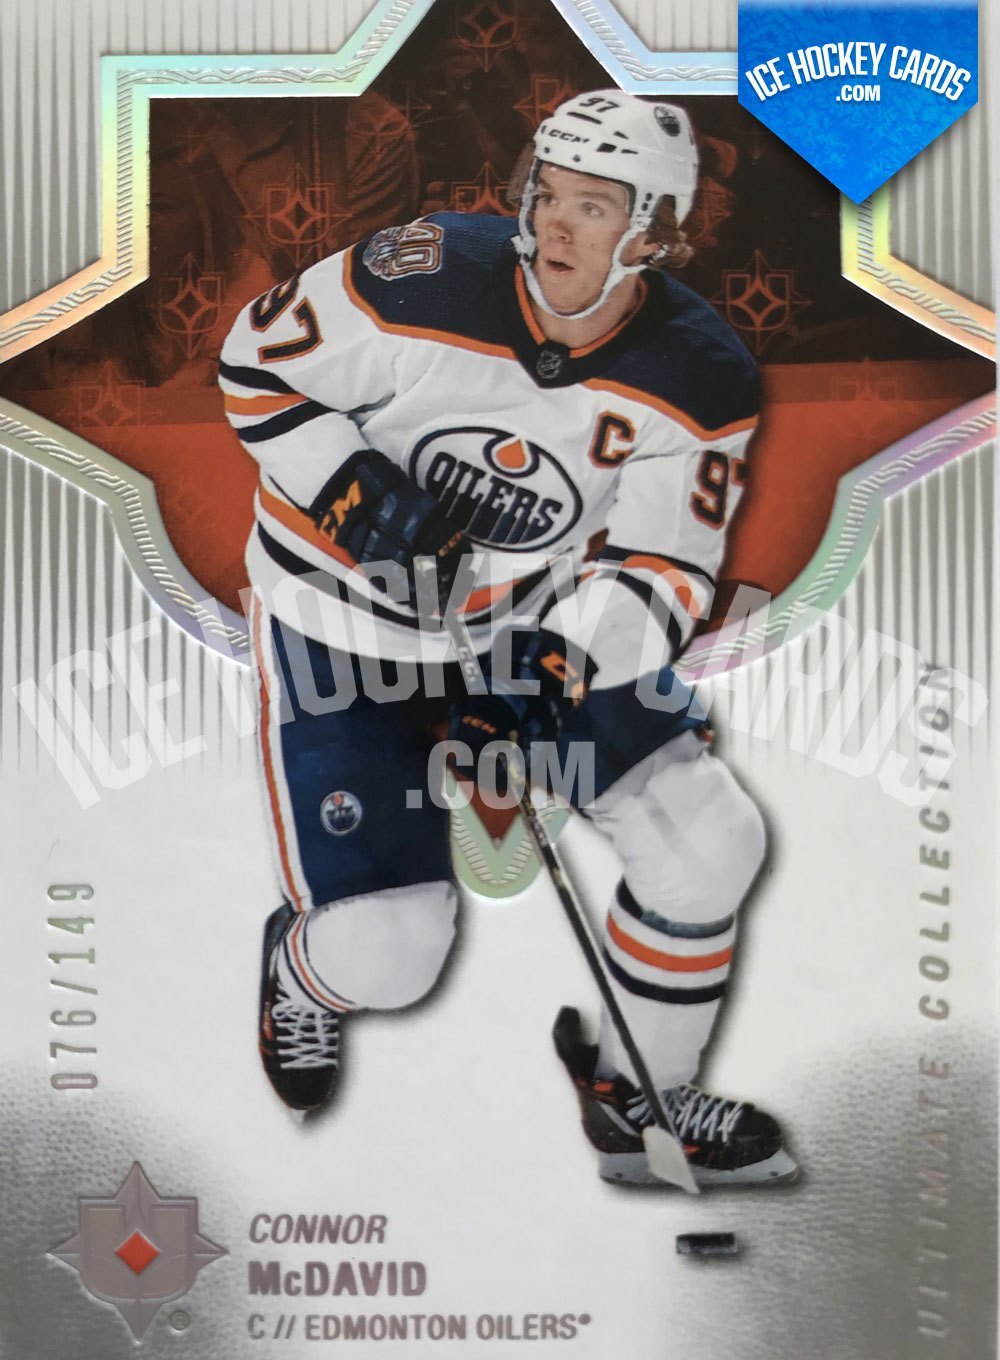 Upper Deck - Ultimate Collection 18-19 - Connor McDavid Base Card #1